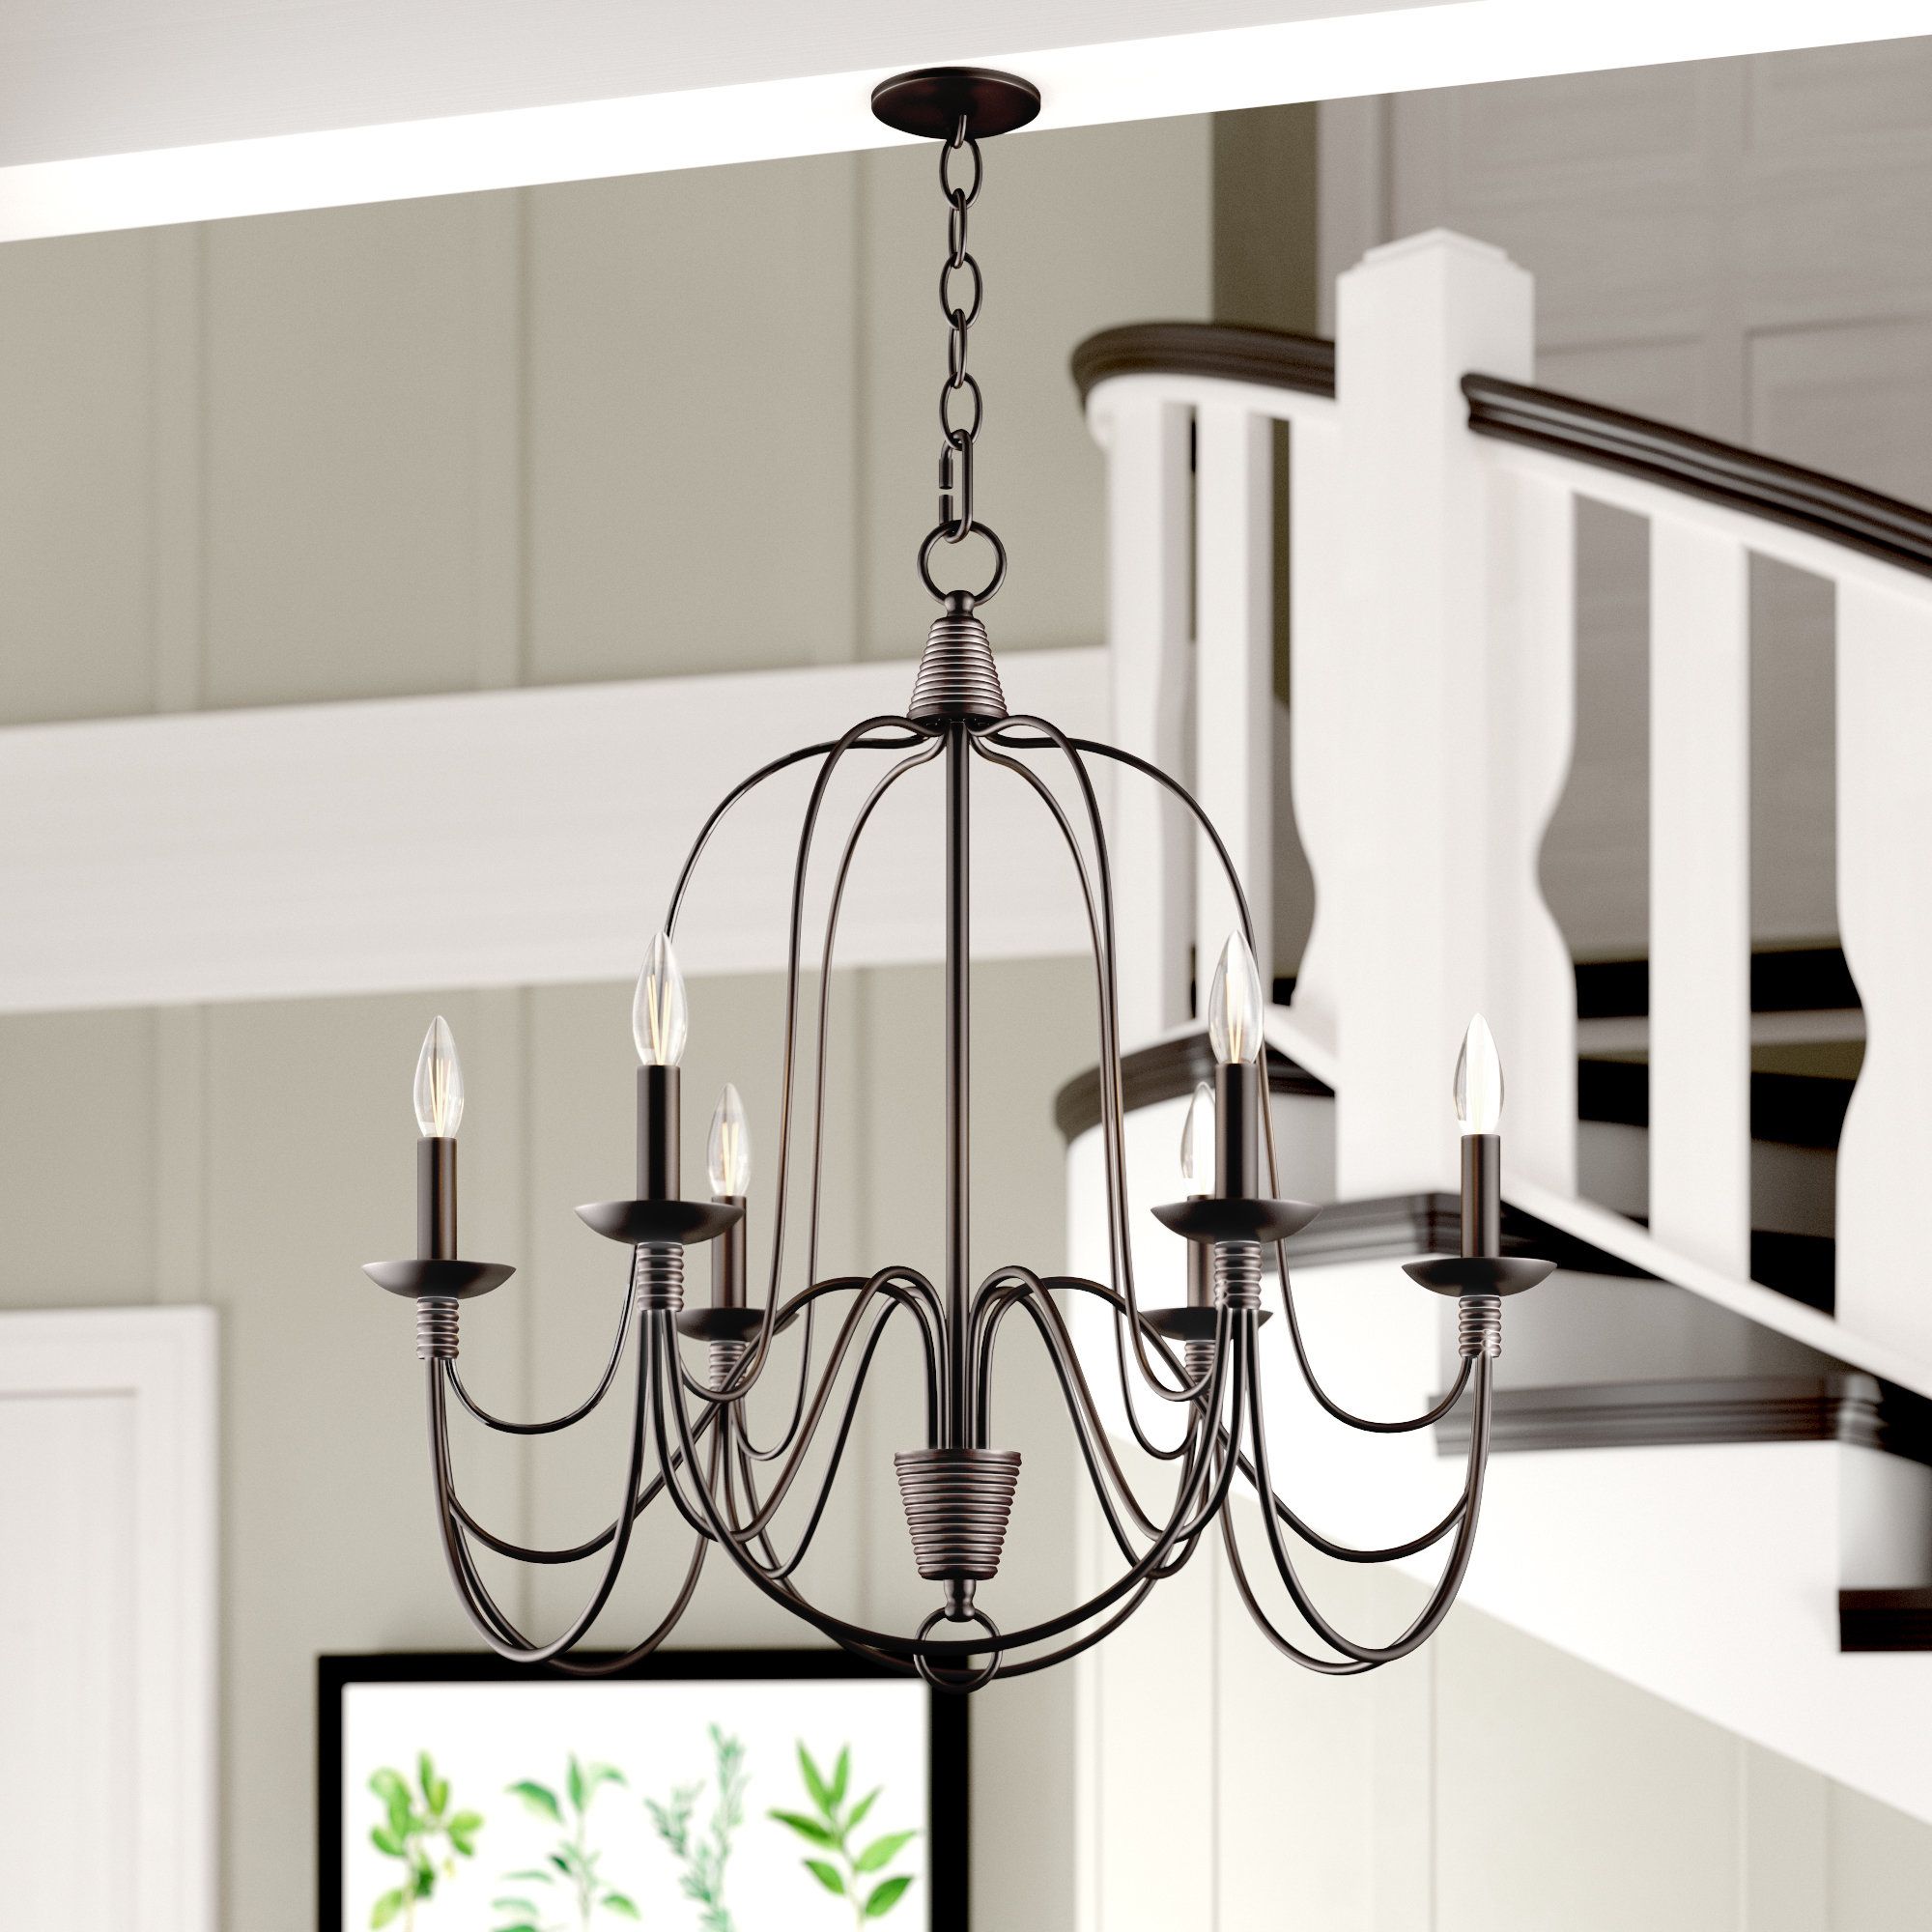 Crim Vintage 6 Light Chandelier Throughout 2019 Watford 6 Light Candle Style Chandeliers (View 15 of 25)